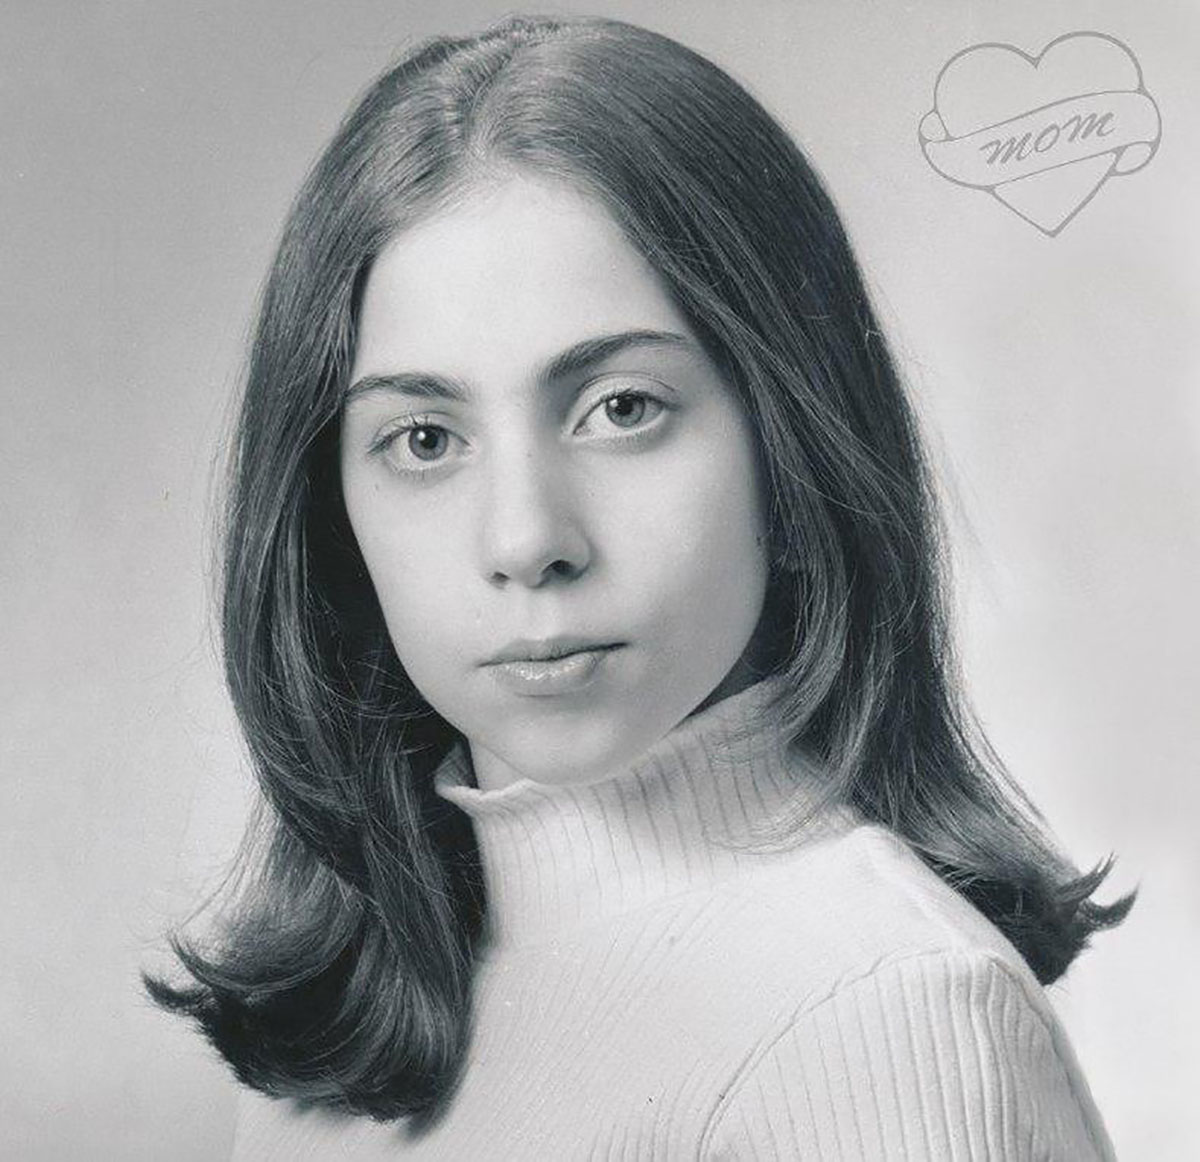 Lady Gaga in her youth